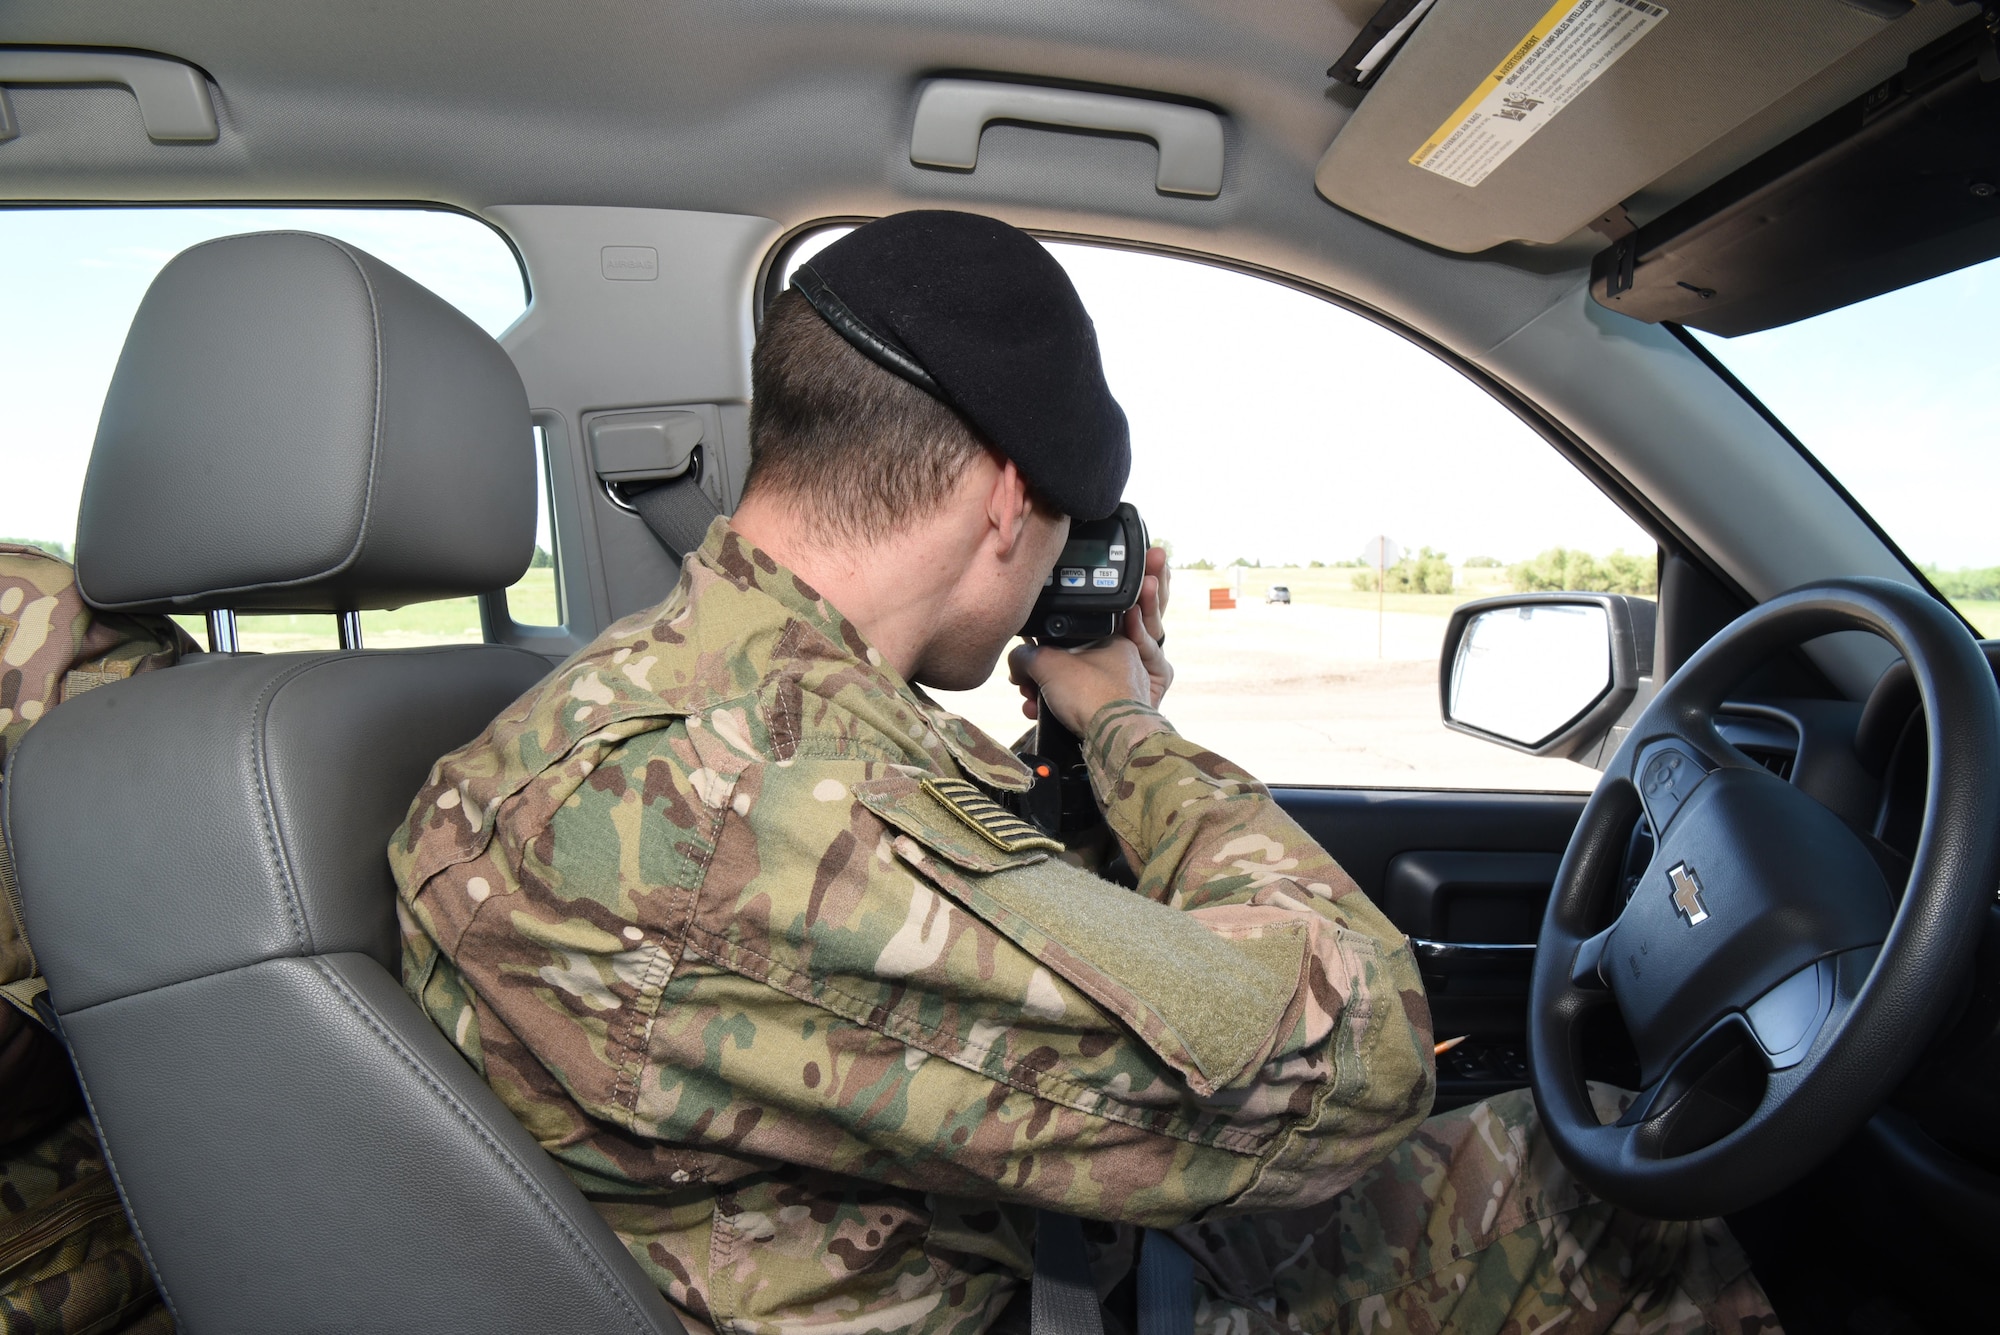 Staff Sgt. Charles Watson, 90th Security Forces Squadron patrolman, check drivers' speed using a laser gun at F.E. Warren Air Force Base, Wyo., July 14, 2017. Trafficking enforcement is one of the many ways the 90th SFS defenders maintain the safety of the installation's personnel. (U.S. Air Force photo by Airman 1st Class Breanna Carter)